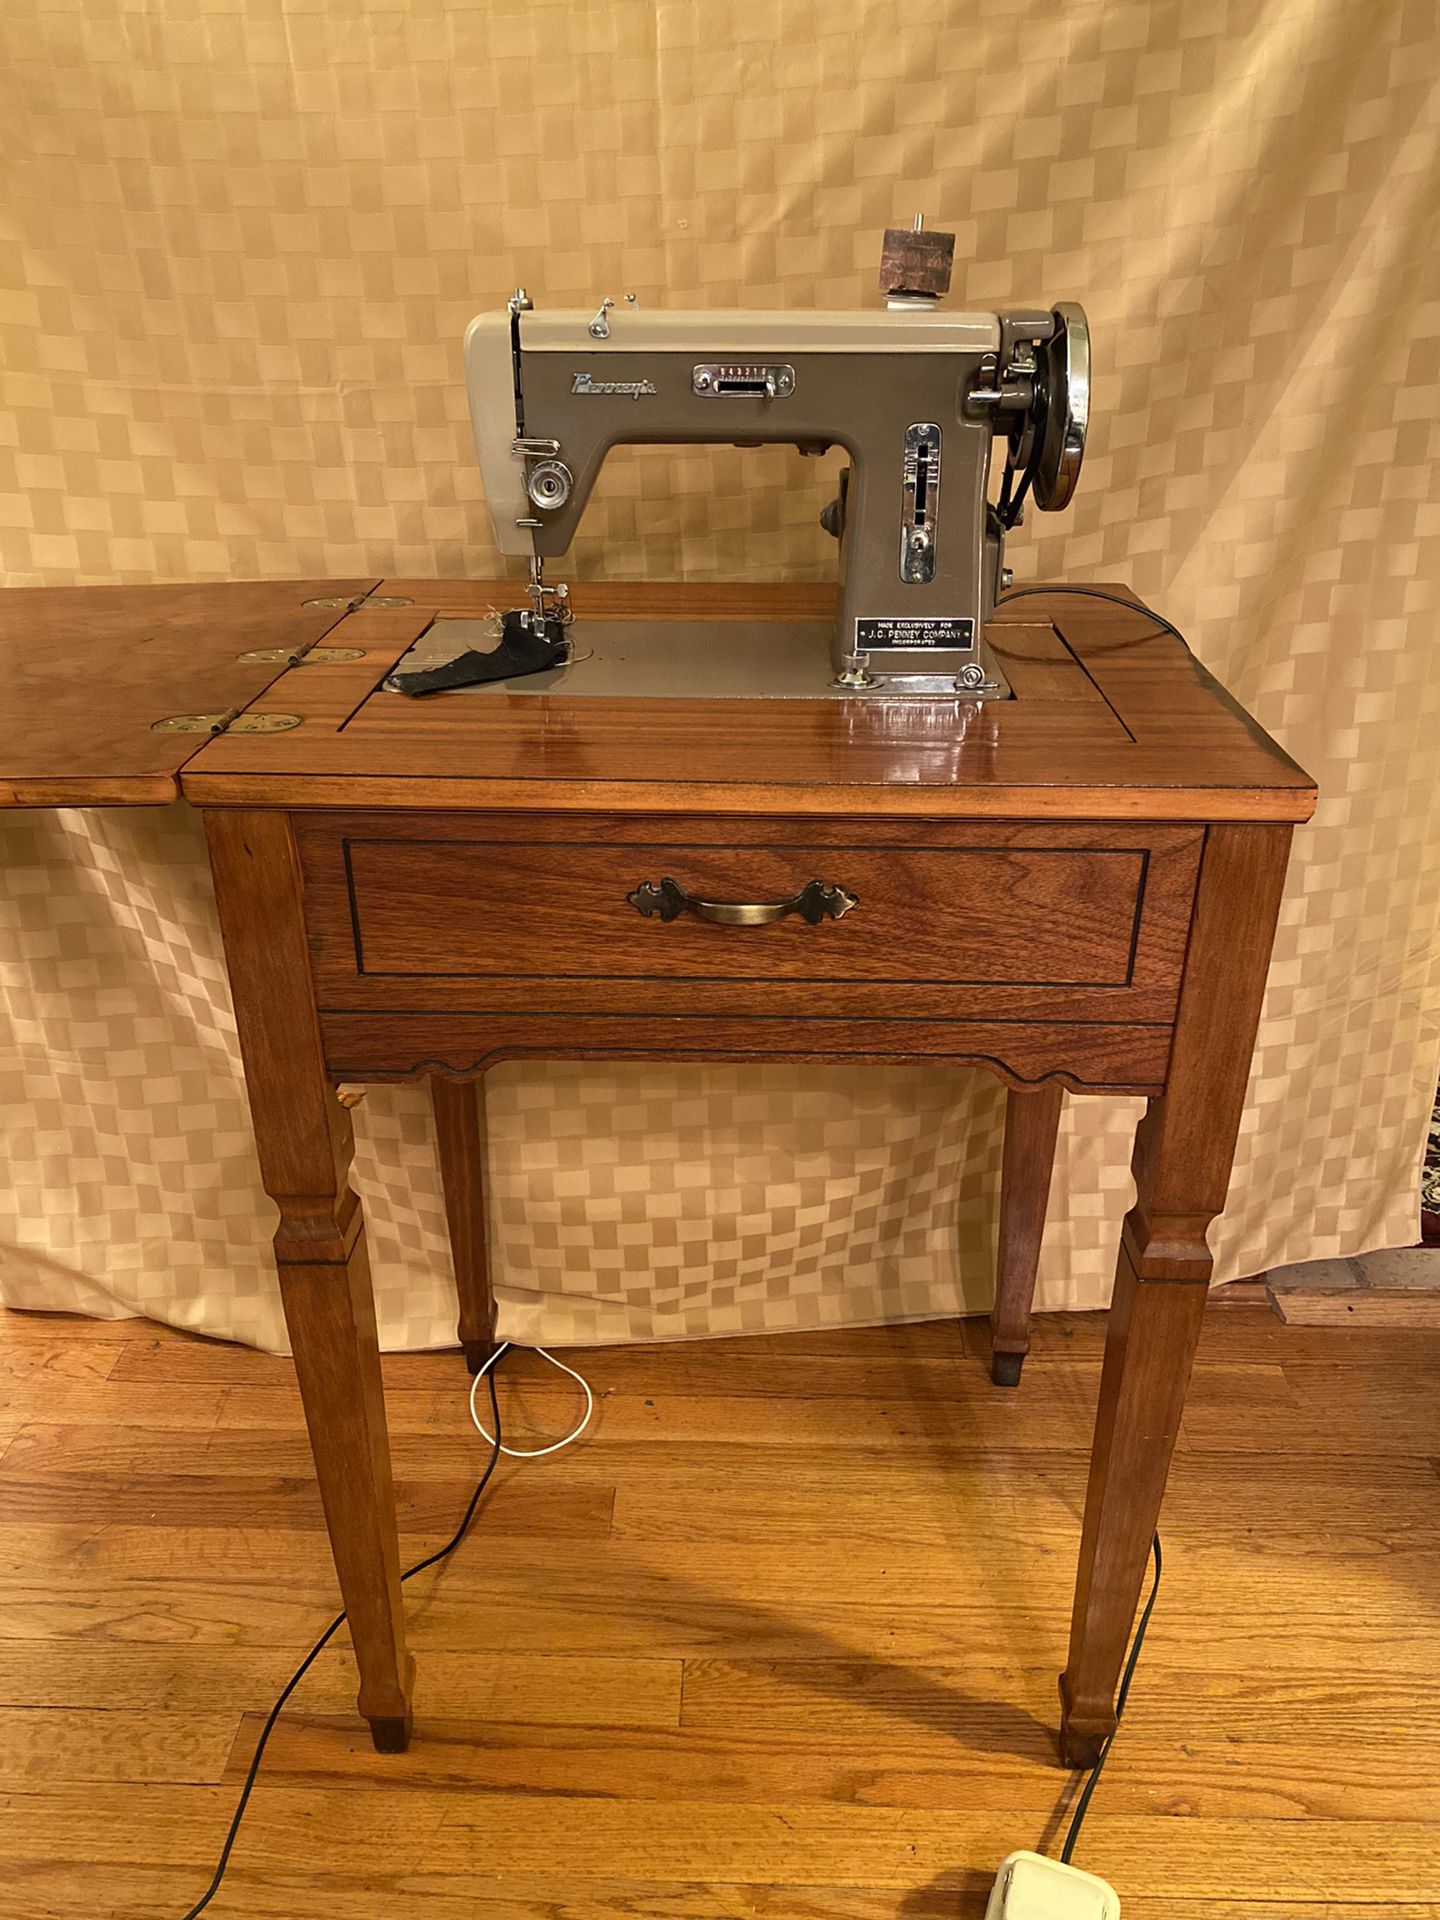 Antique Vintage JC PENNEY Sewing machine with Table